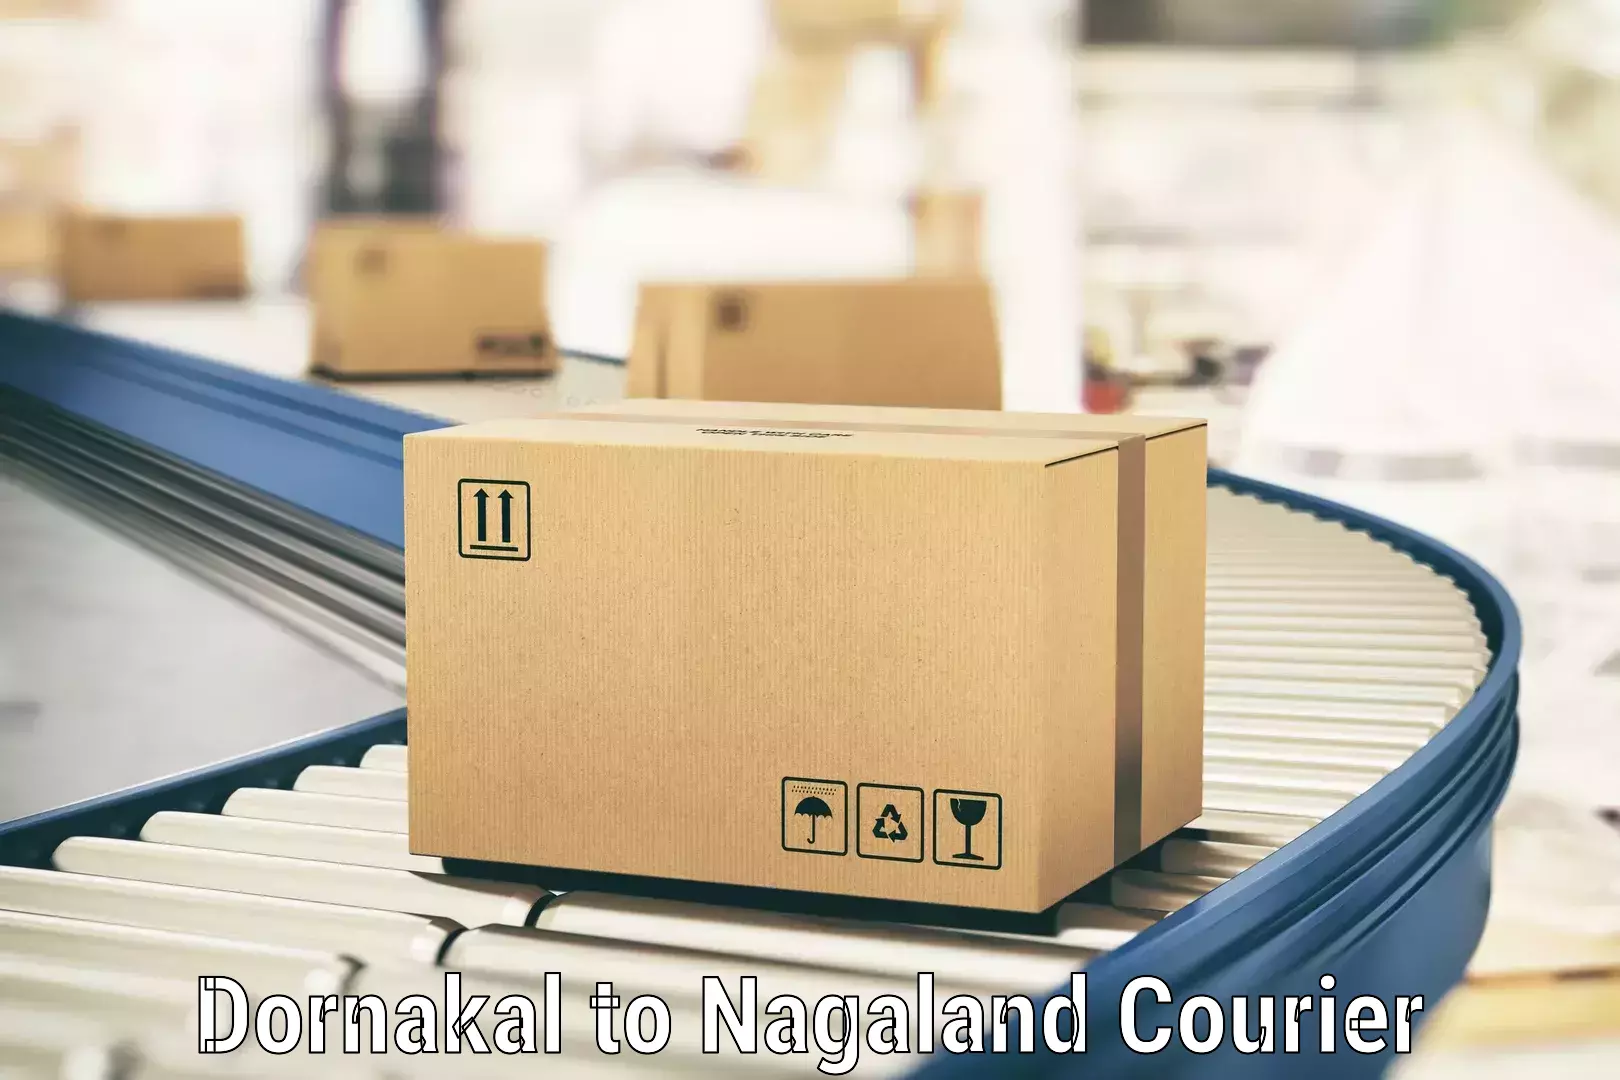 State-of-the-art courier technology Dornakal to Mokokchung